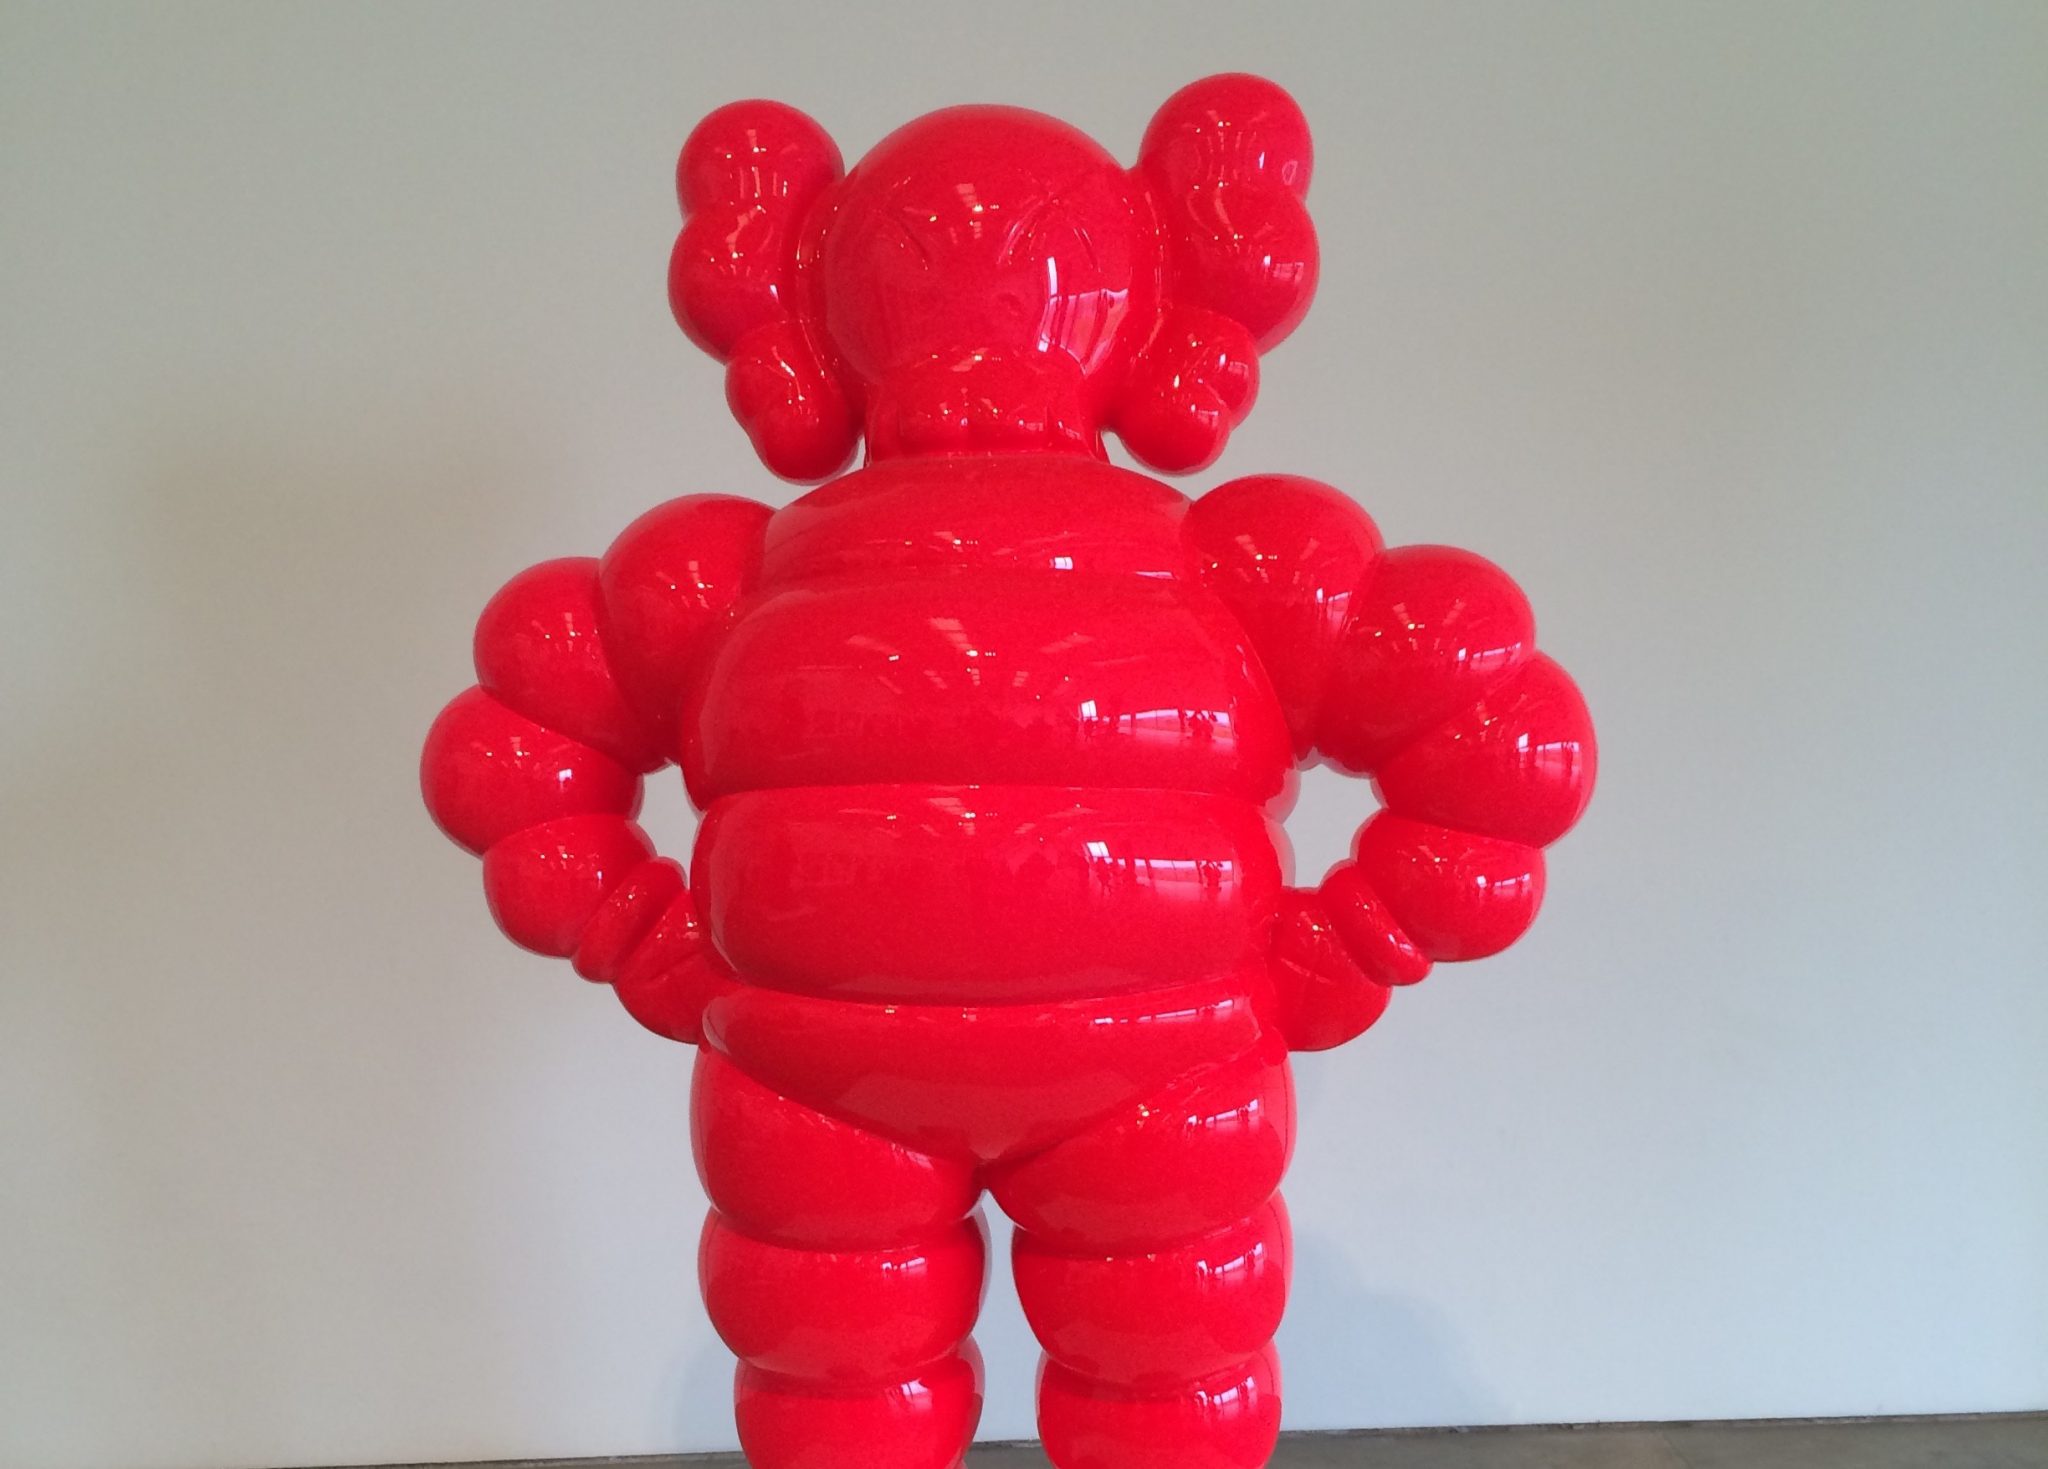 Review: Artist KAWS at The Yorkshire Sculpture Park - The State Of The